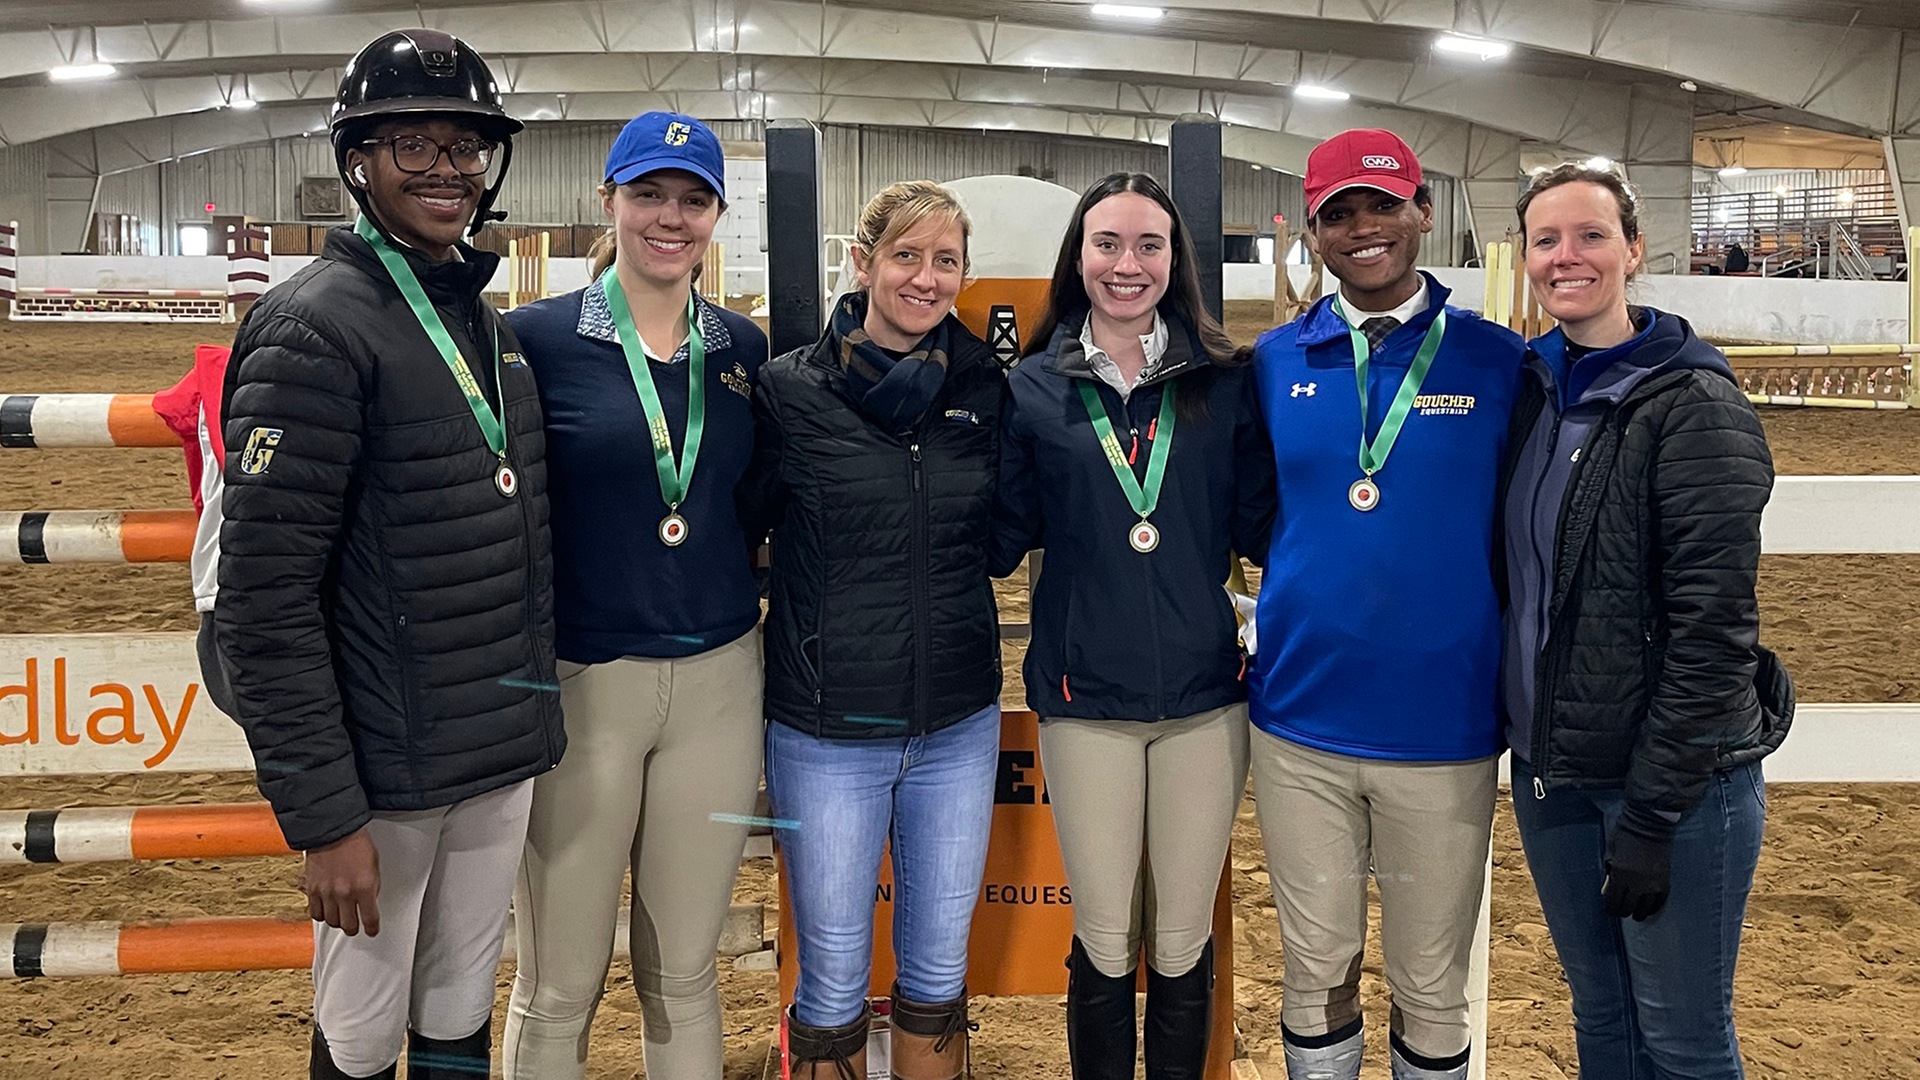 Equestrian Places Sixth at Spring Classic Tournament of Champions